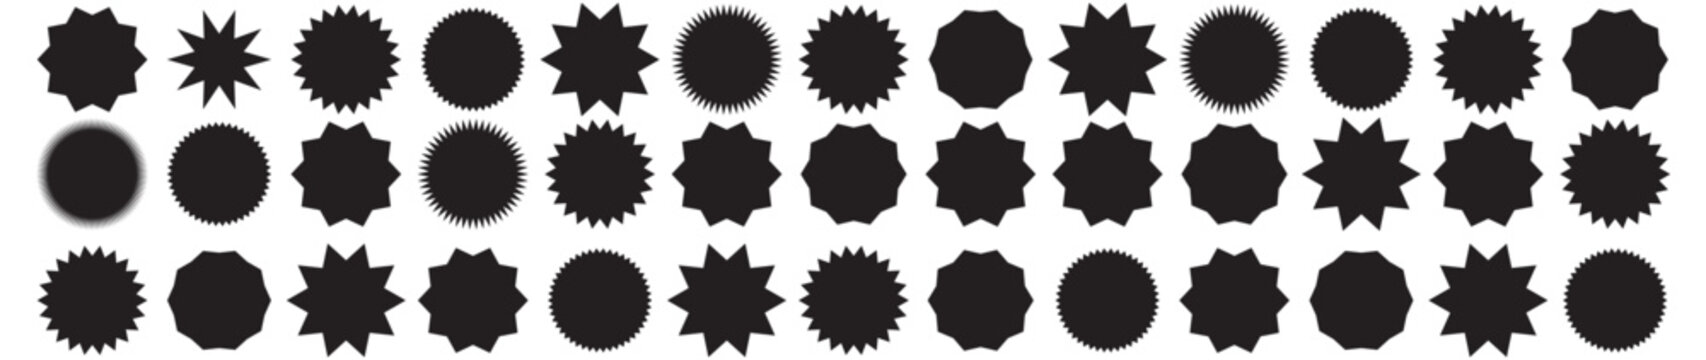 Set of vector starburst, sunburst badges. Vintage labels. Black colored stickers. A collection of different types and black colors icon.